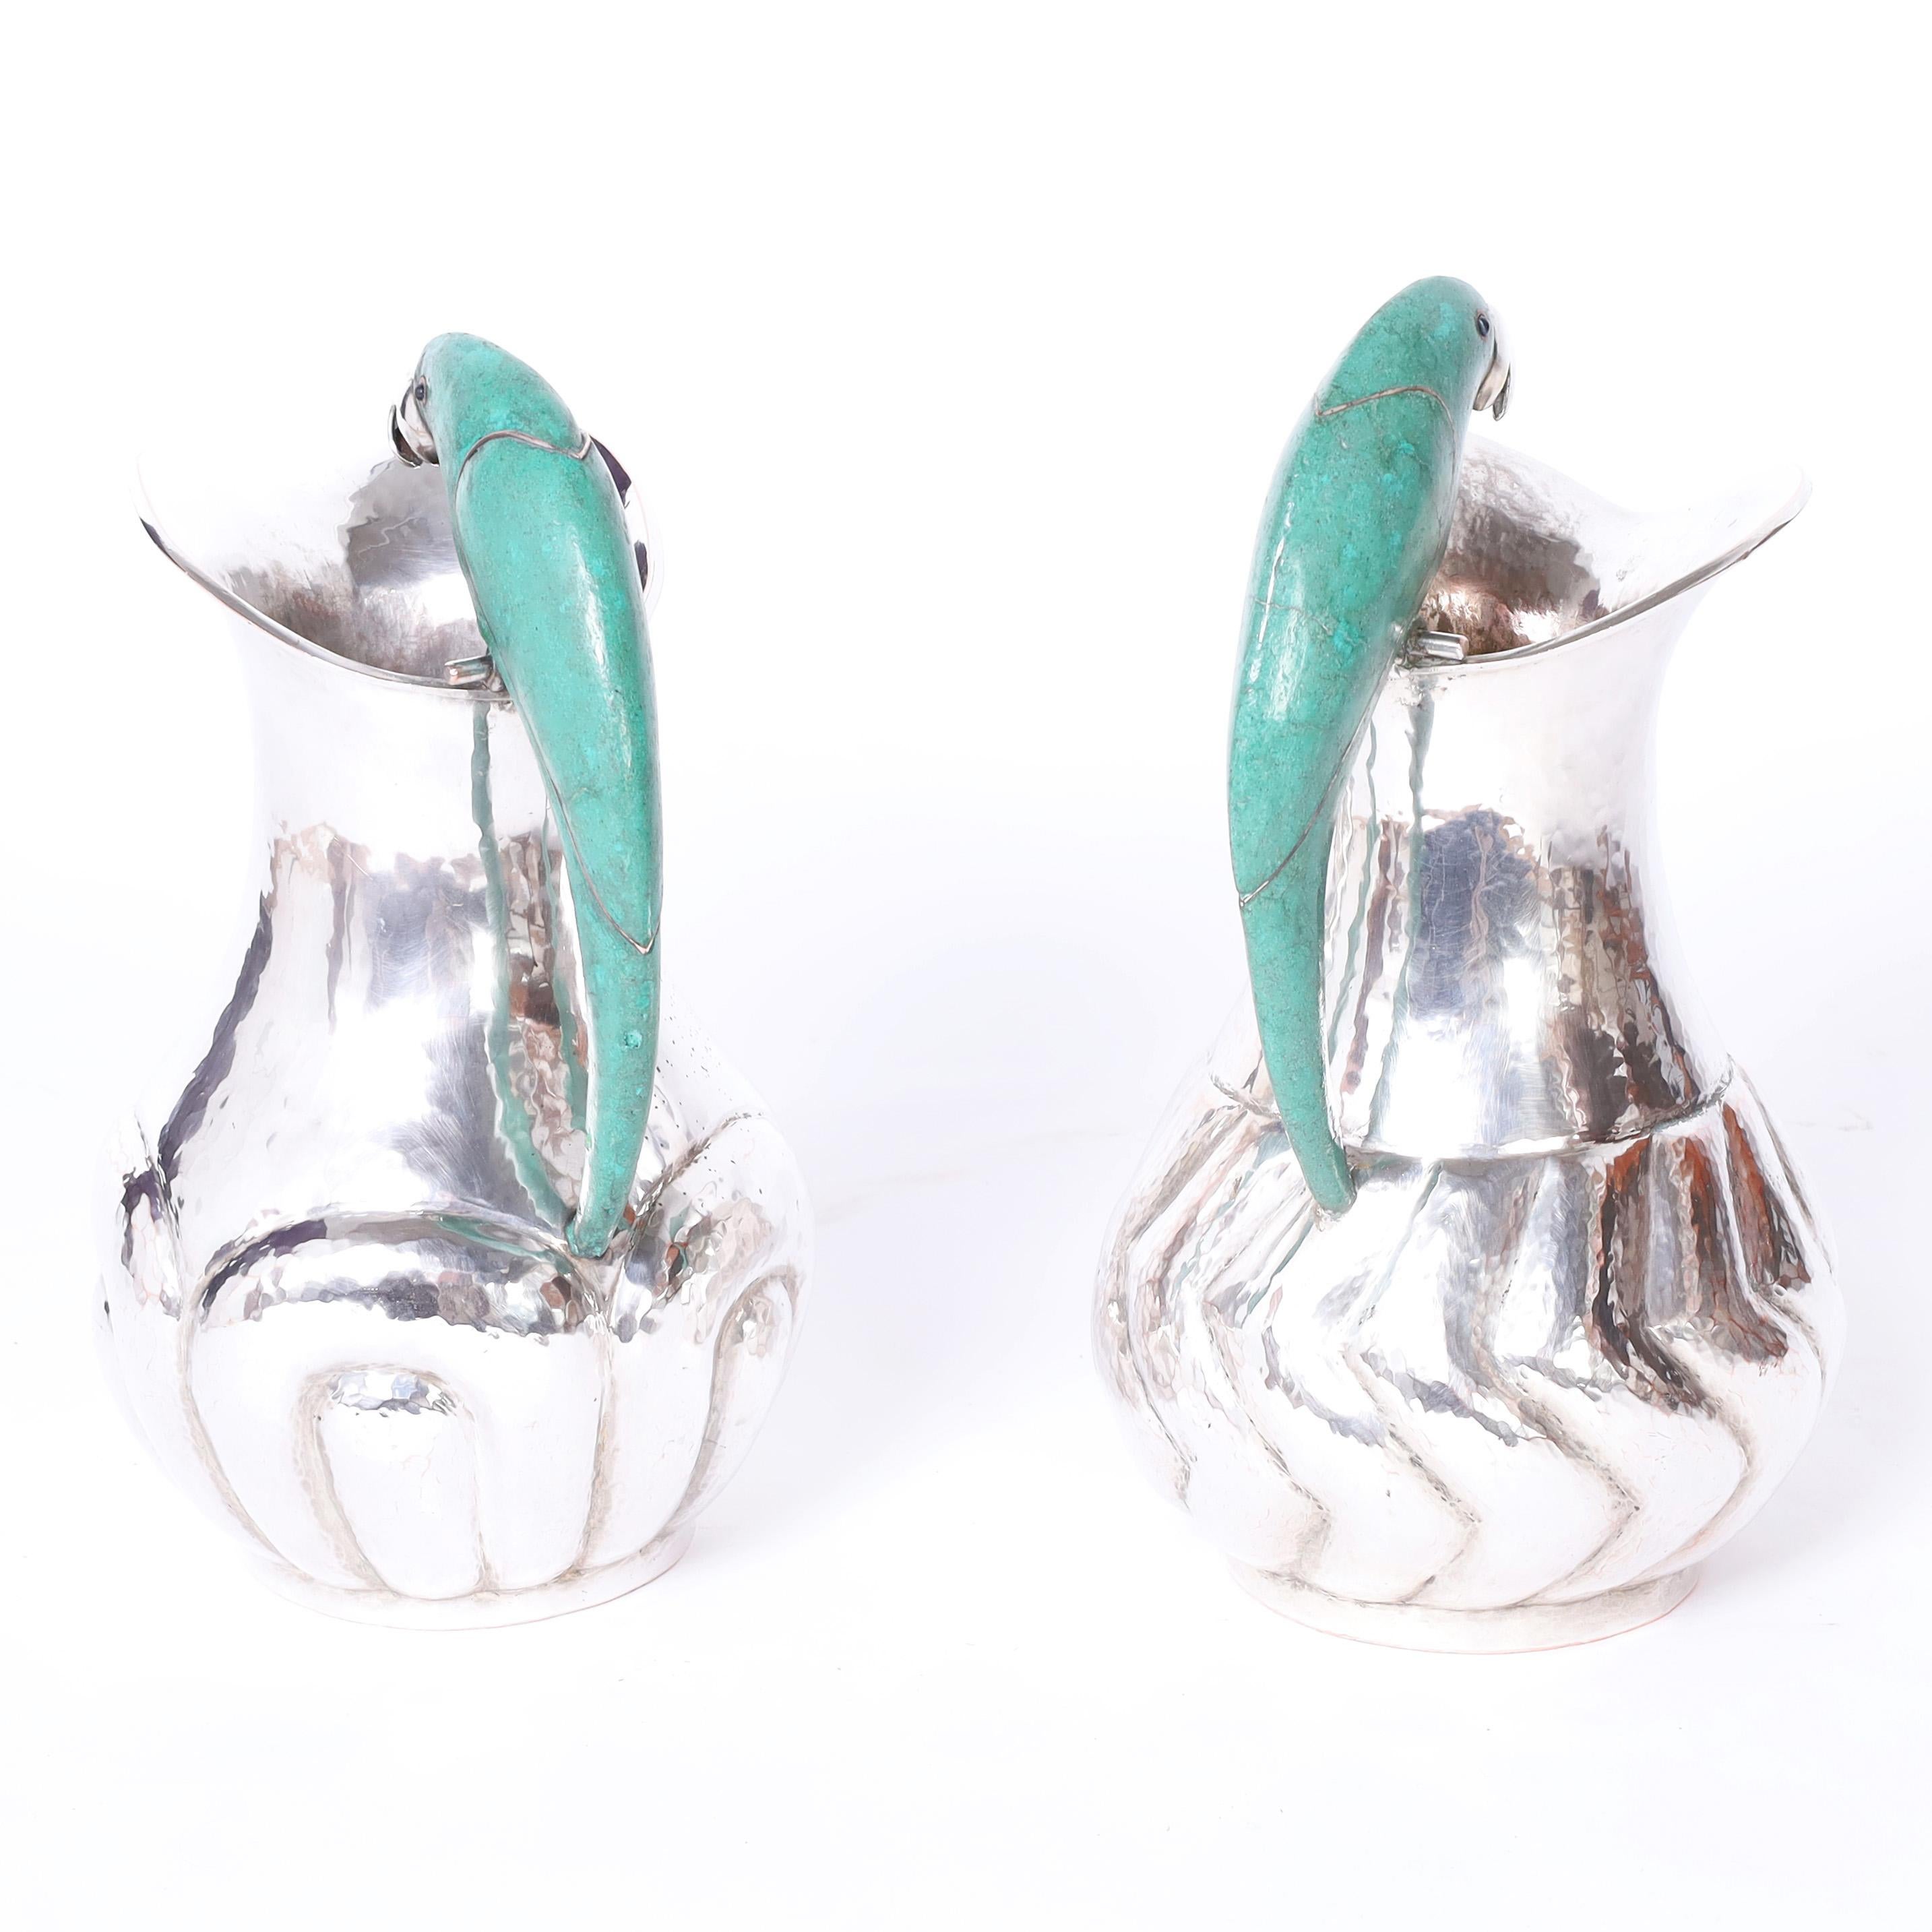 Standout near pair of pitchers hand crafted in hammered copper under silver plate in modern form featuring stone clad stylized parrots as handles. Stamped Mexico on the bottoms.